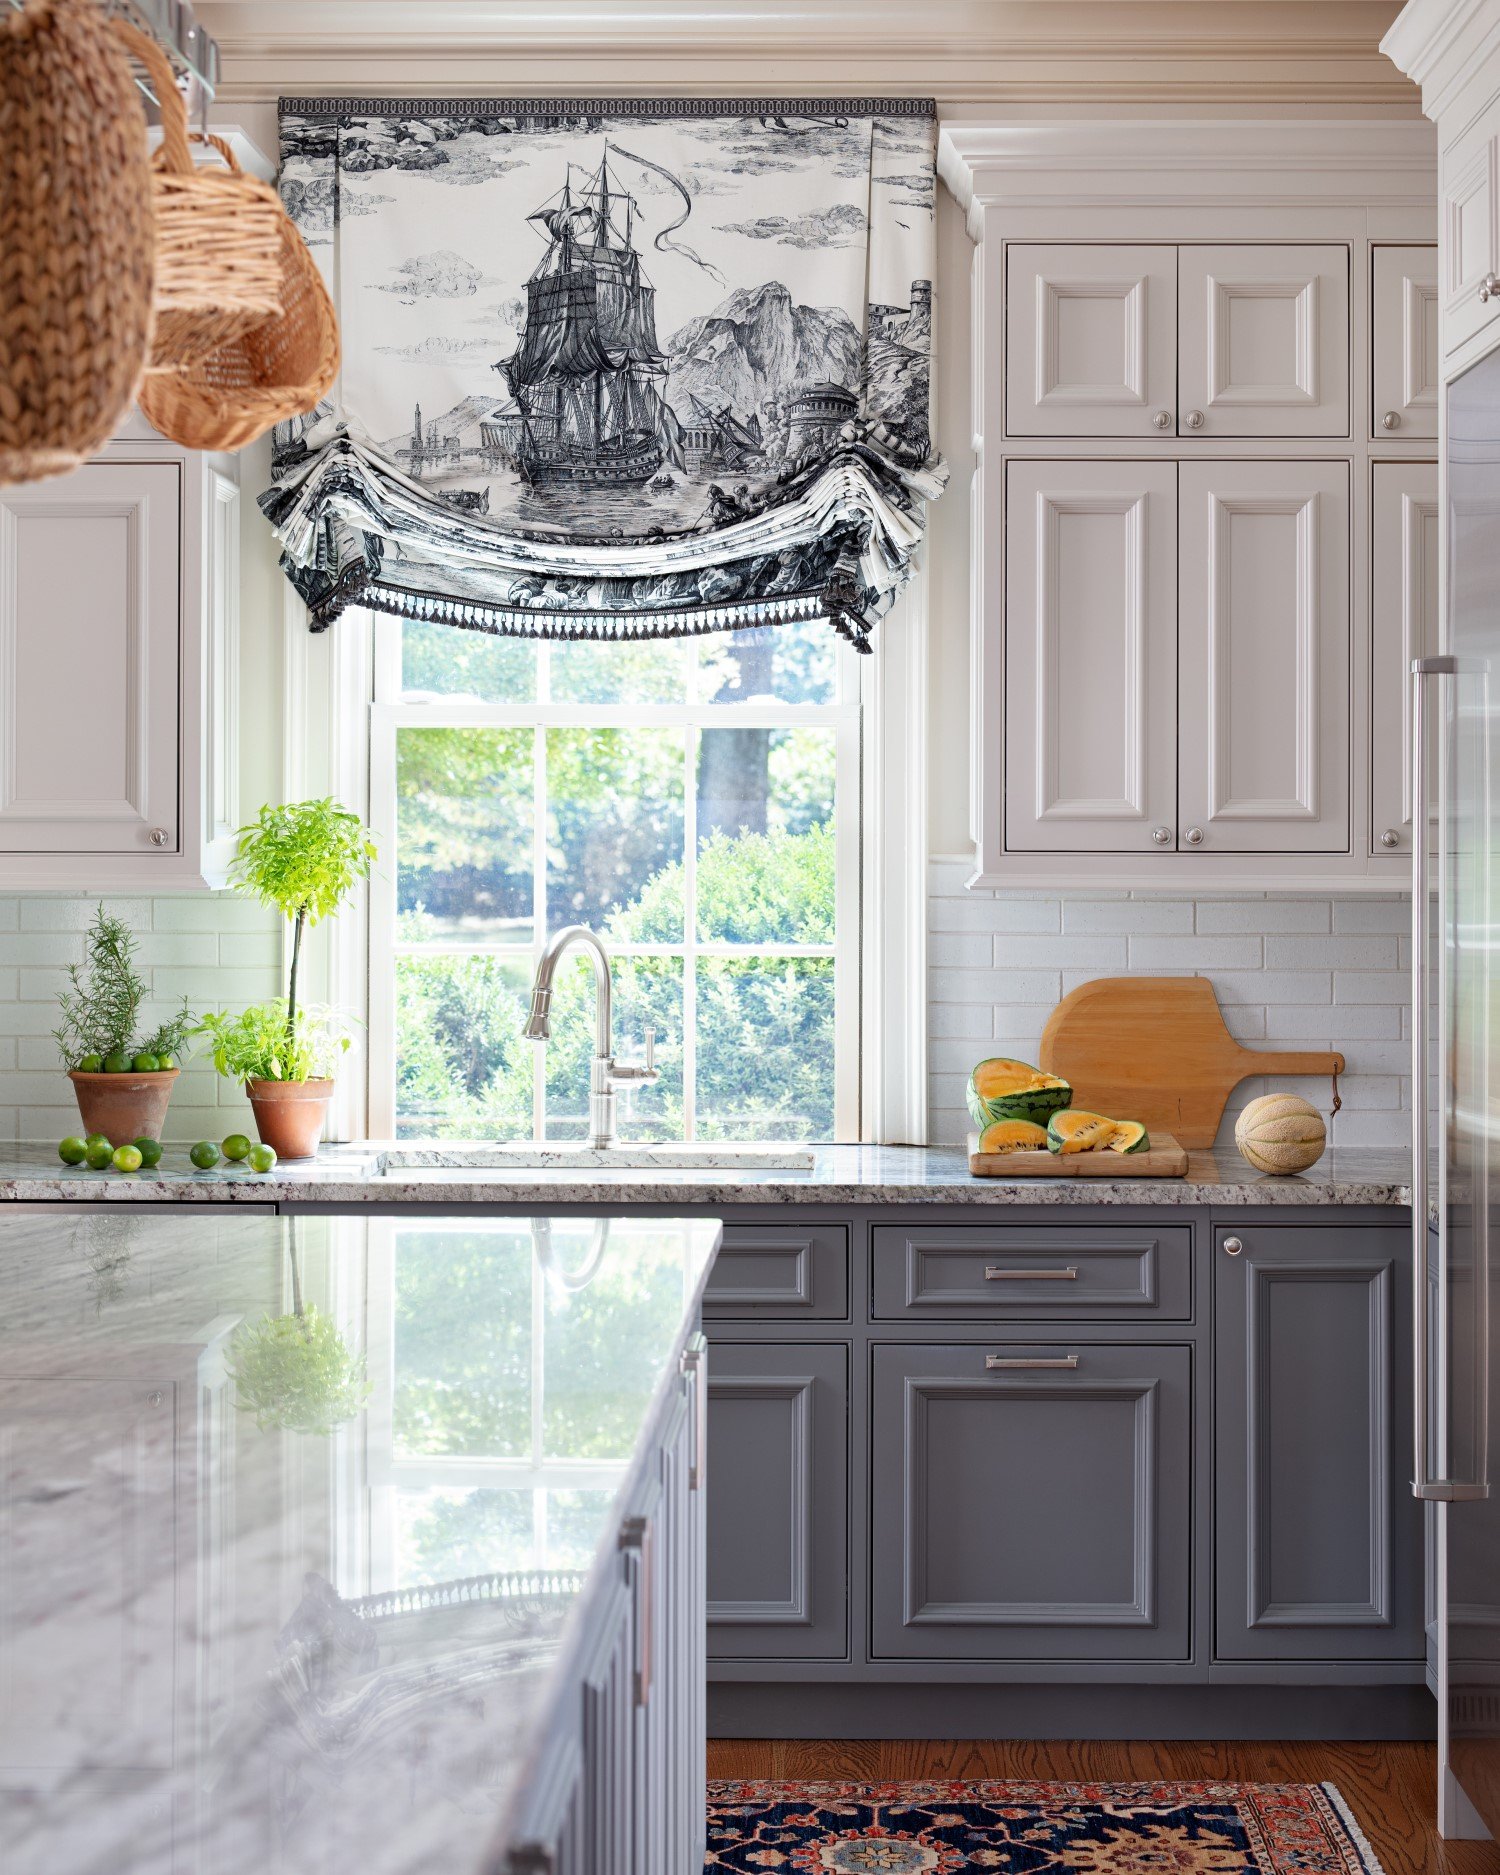  Two-tone custom cabinetry with classic lines and moldings in creamy white above a mid-tone, historical gray-blue work beautifully with the quartz counter and island tops 